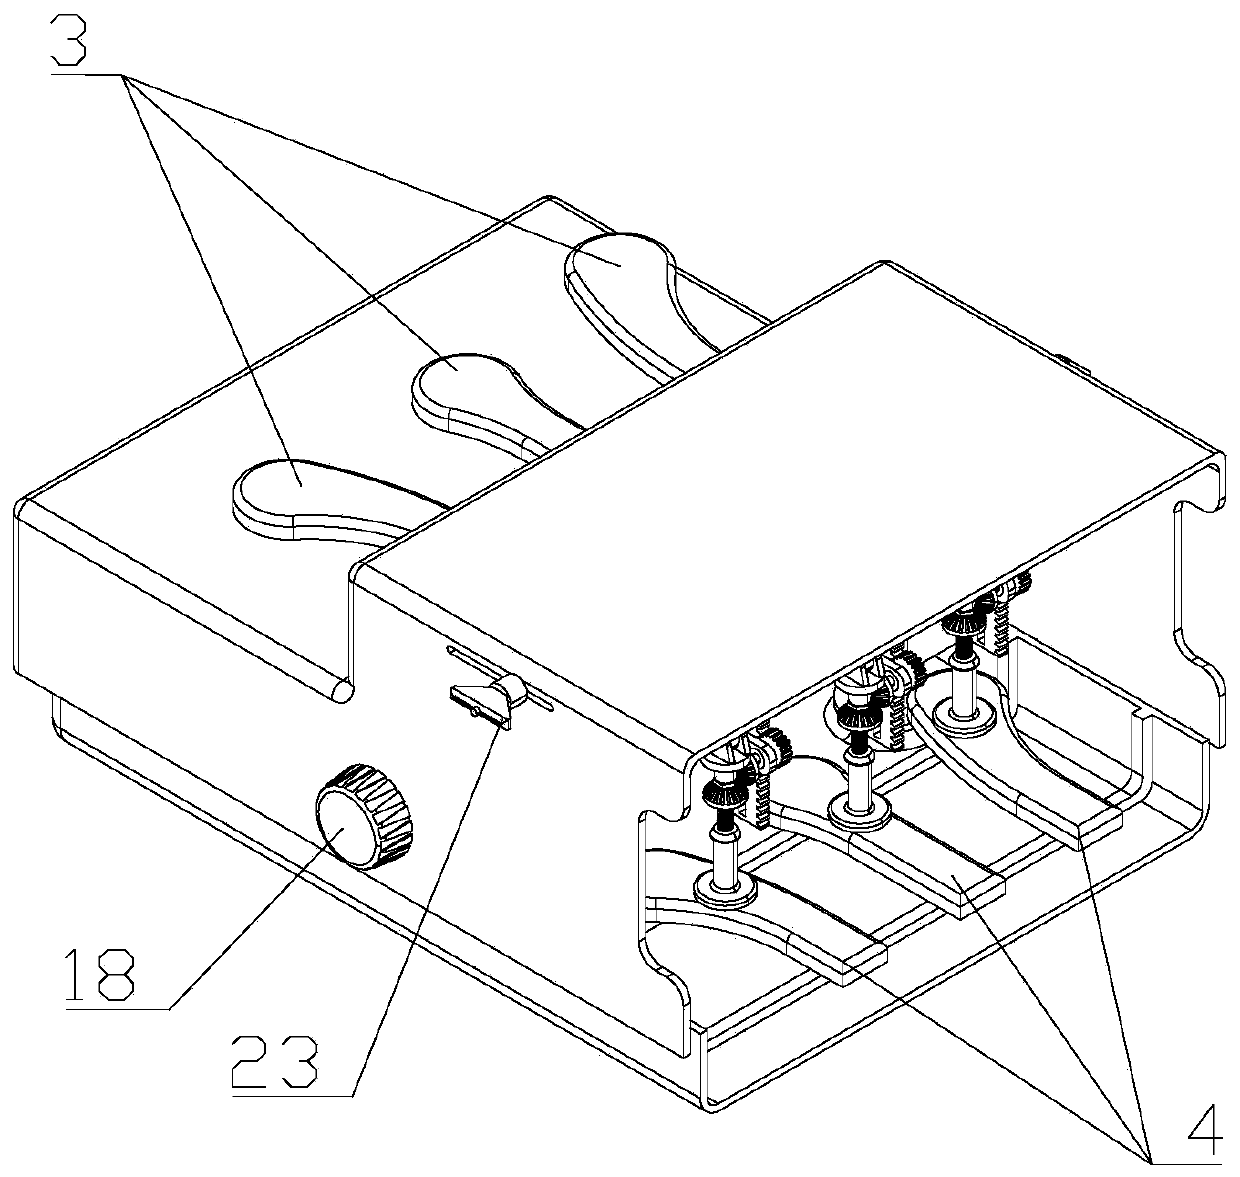 Piano pedal auxiliary device capable of adjusting height